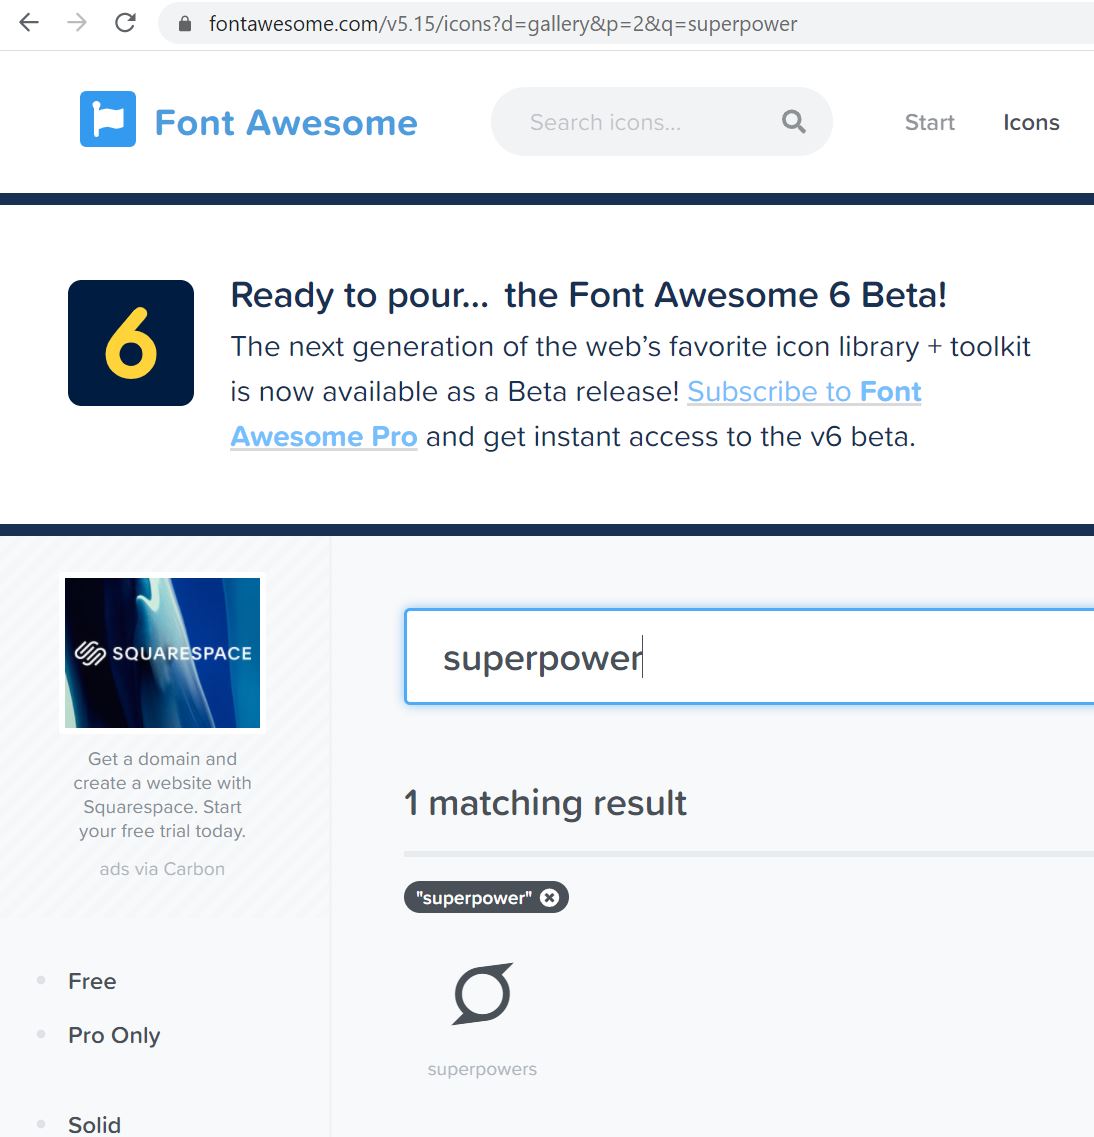 fontawesome.com can be used to search for new icons to use in the CV, here the search is for 'superpower'